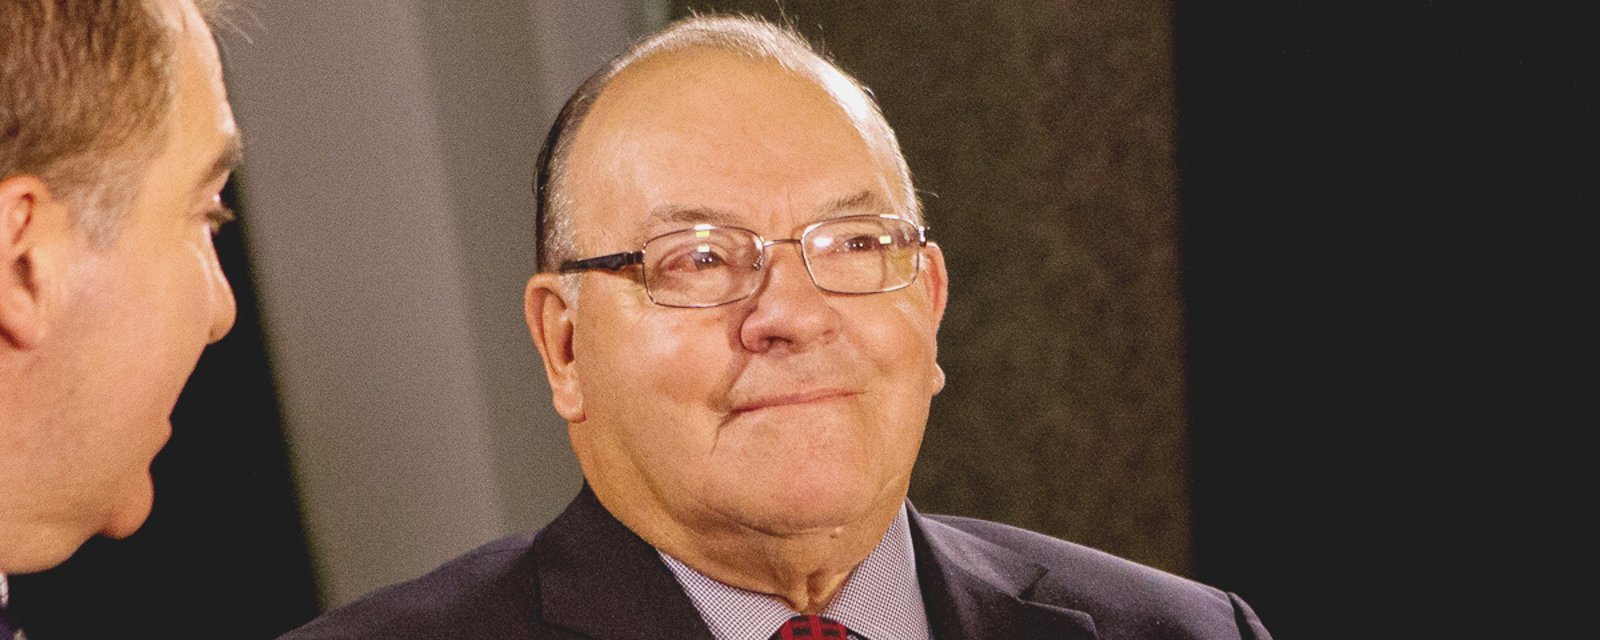 Scotty Bowman received another important distinction!